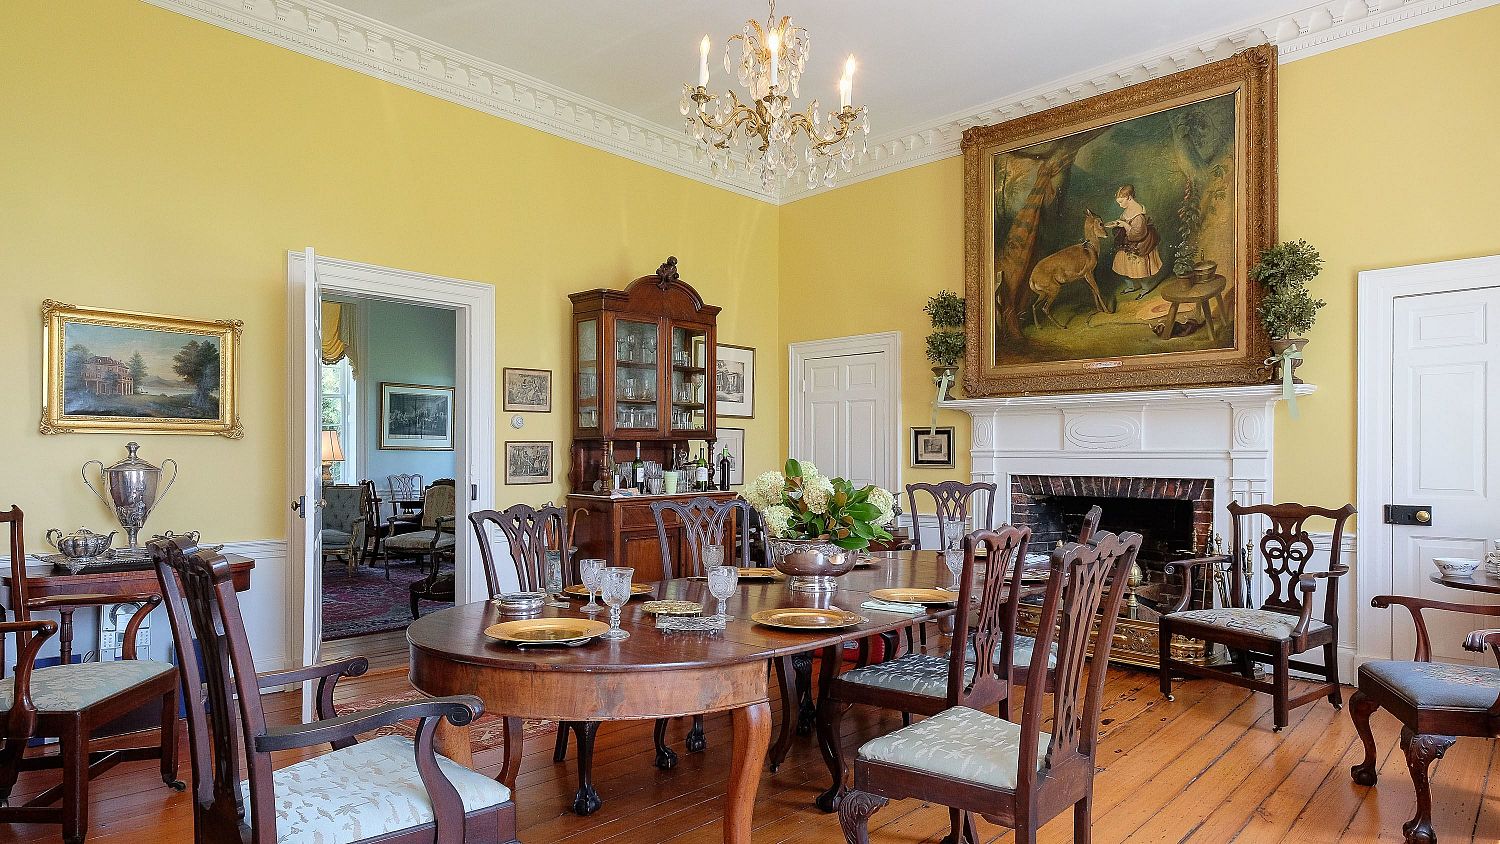 The dining room of the Mulberry Hill manor house